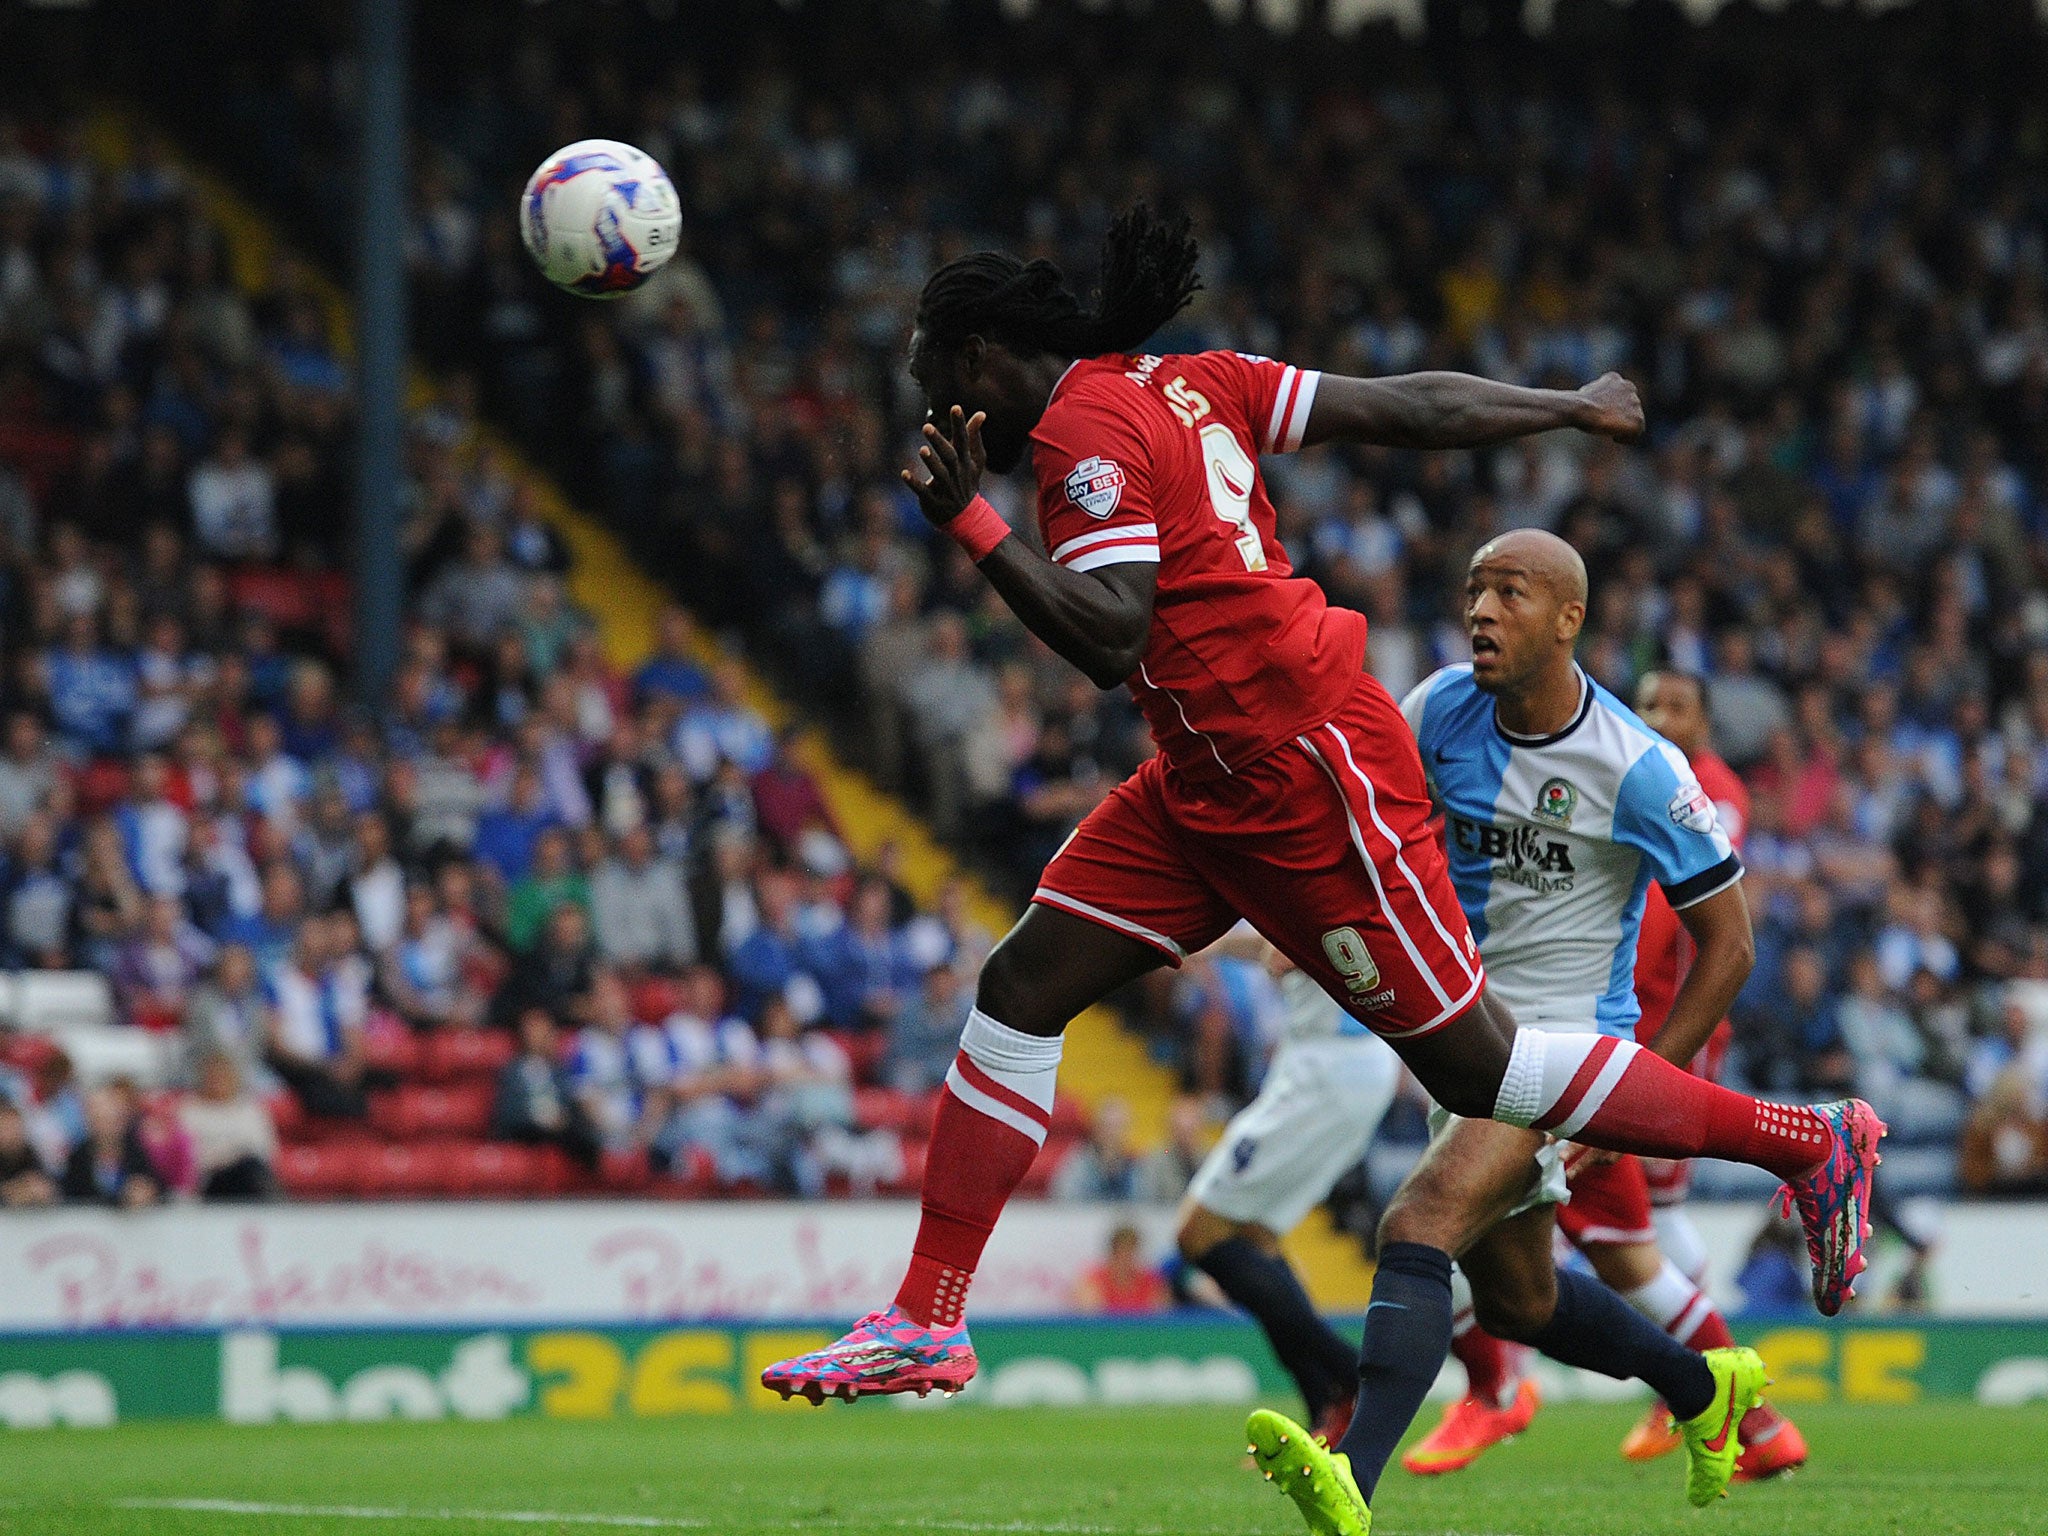 Kenwyne Jones puts Cardiff City into the lead last night
before Blackburn Rovers came back to equalise